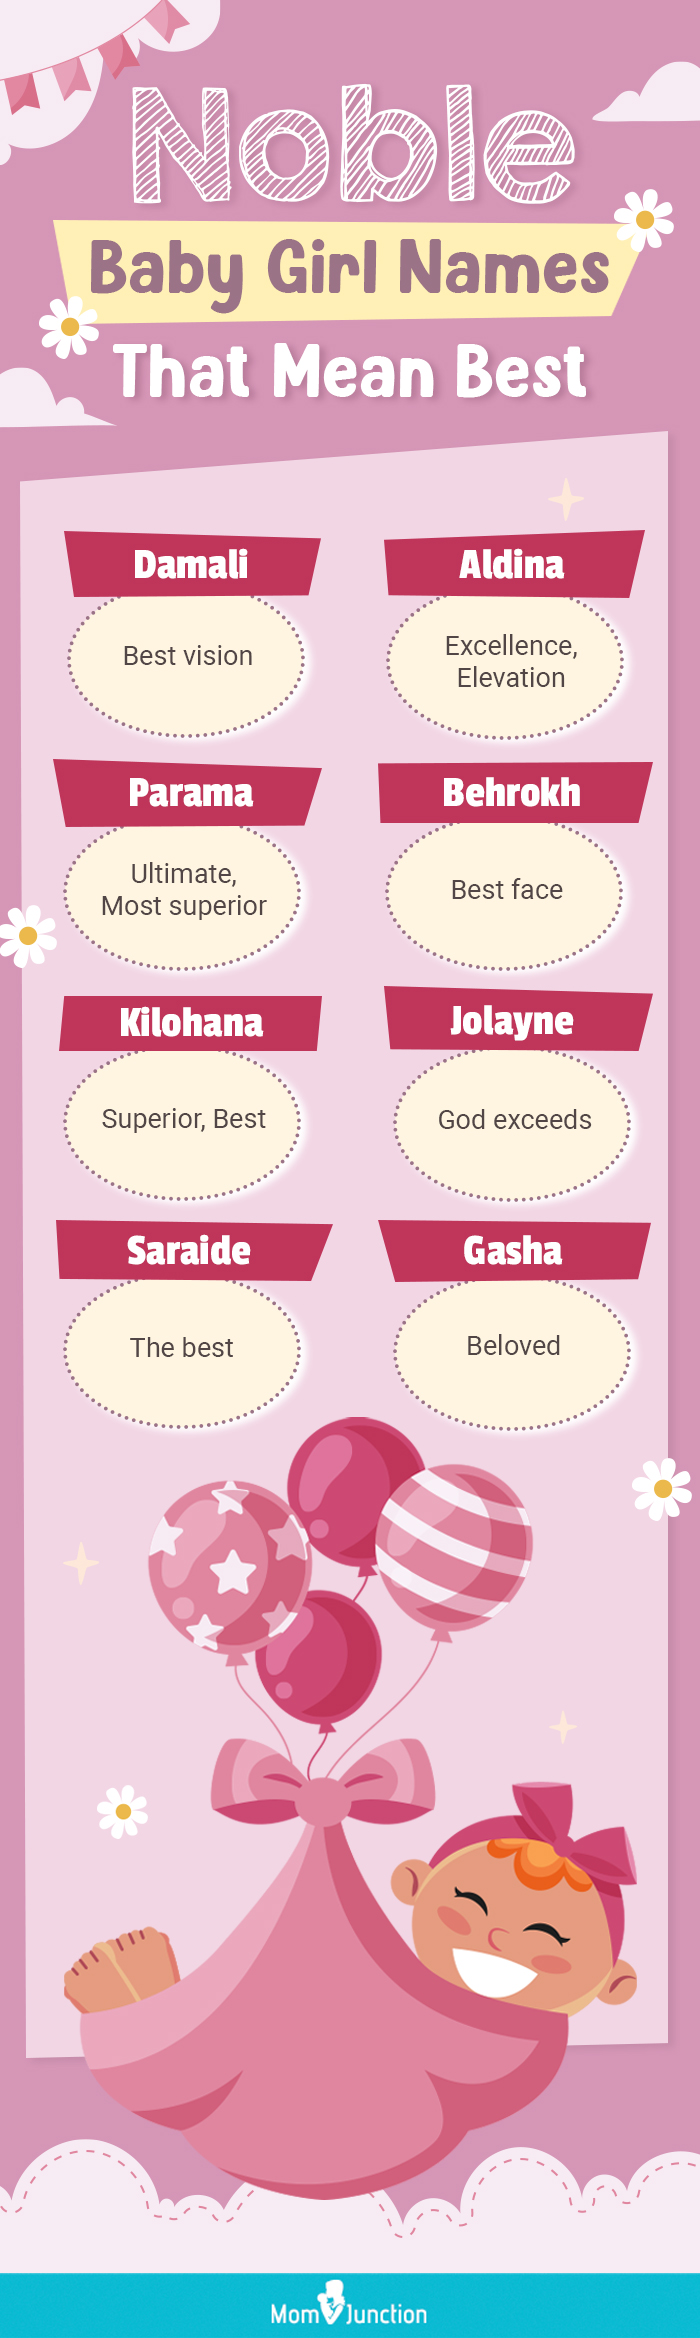 noble baby girl names that mean best(infographic)